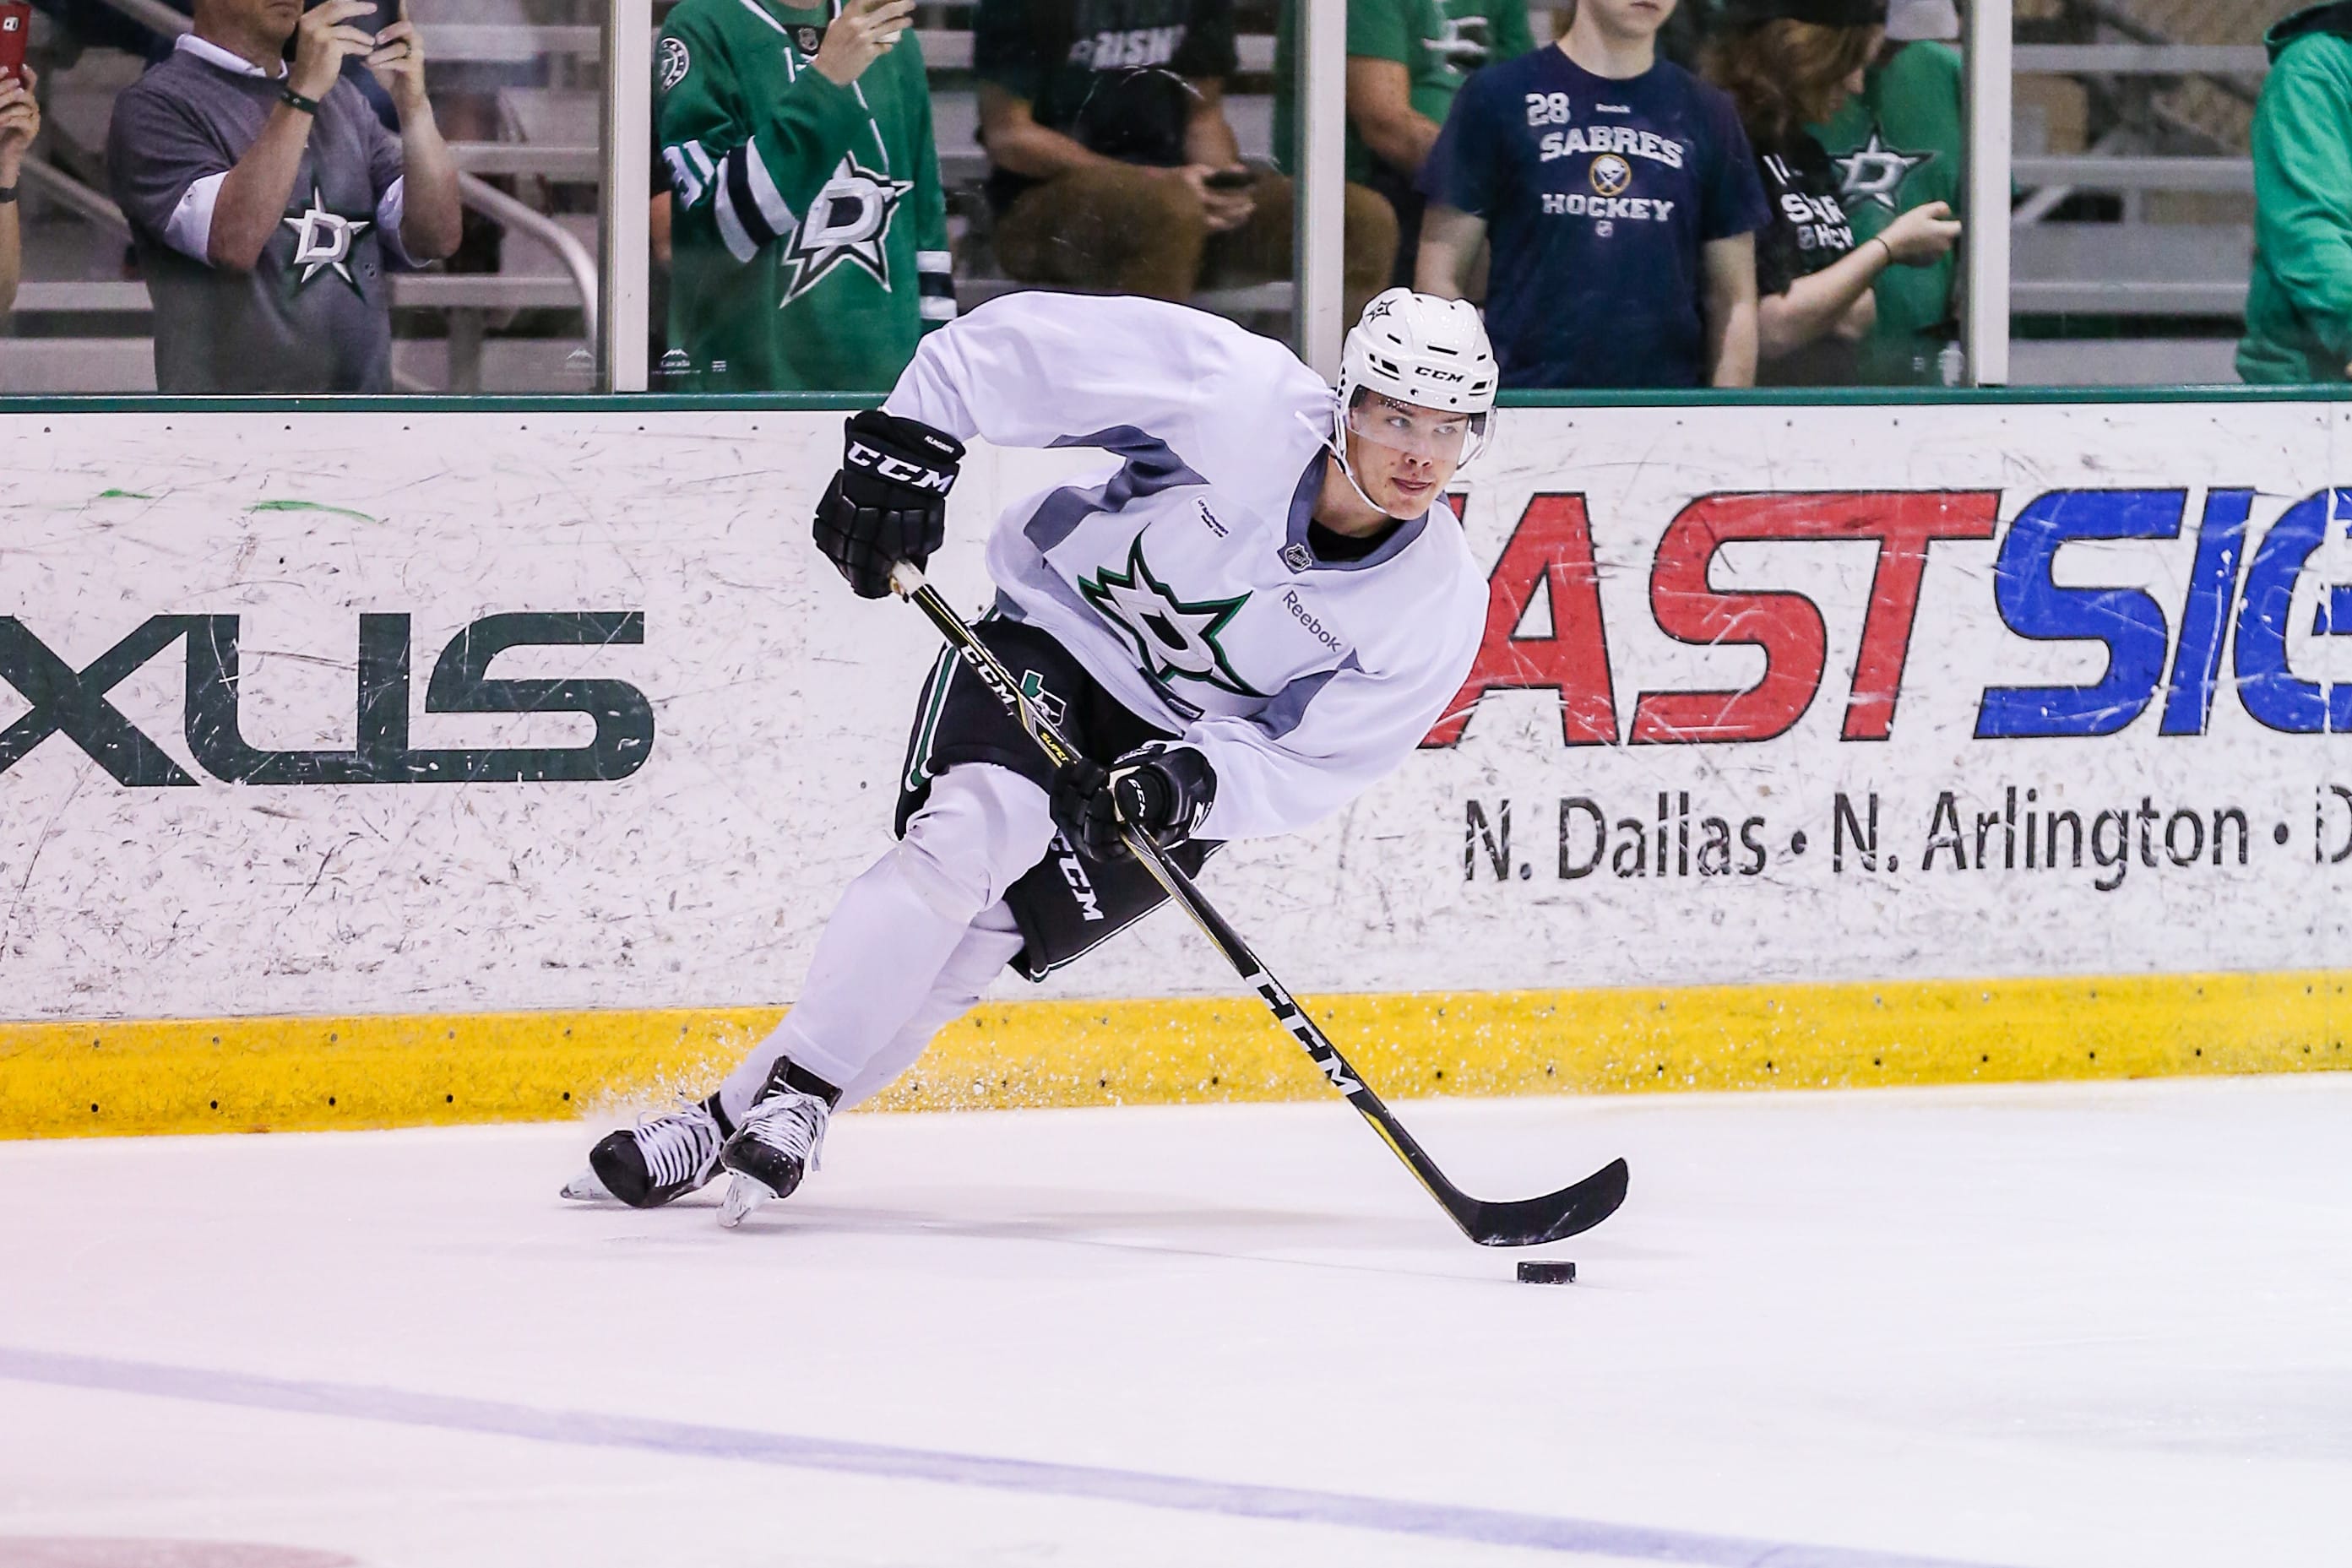 Dallas Stars Training Camp What To Do With a Weekend in Austin